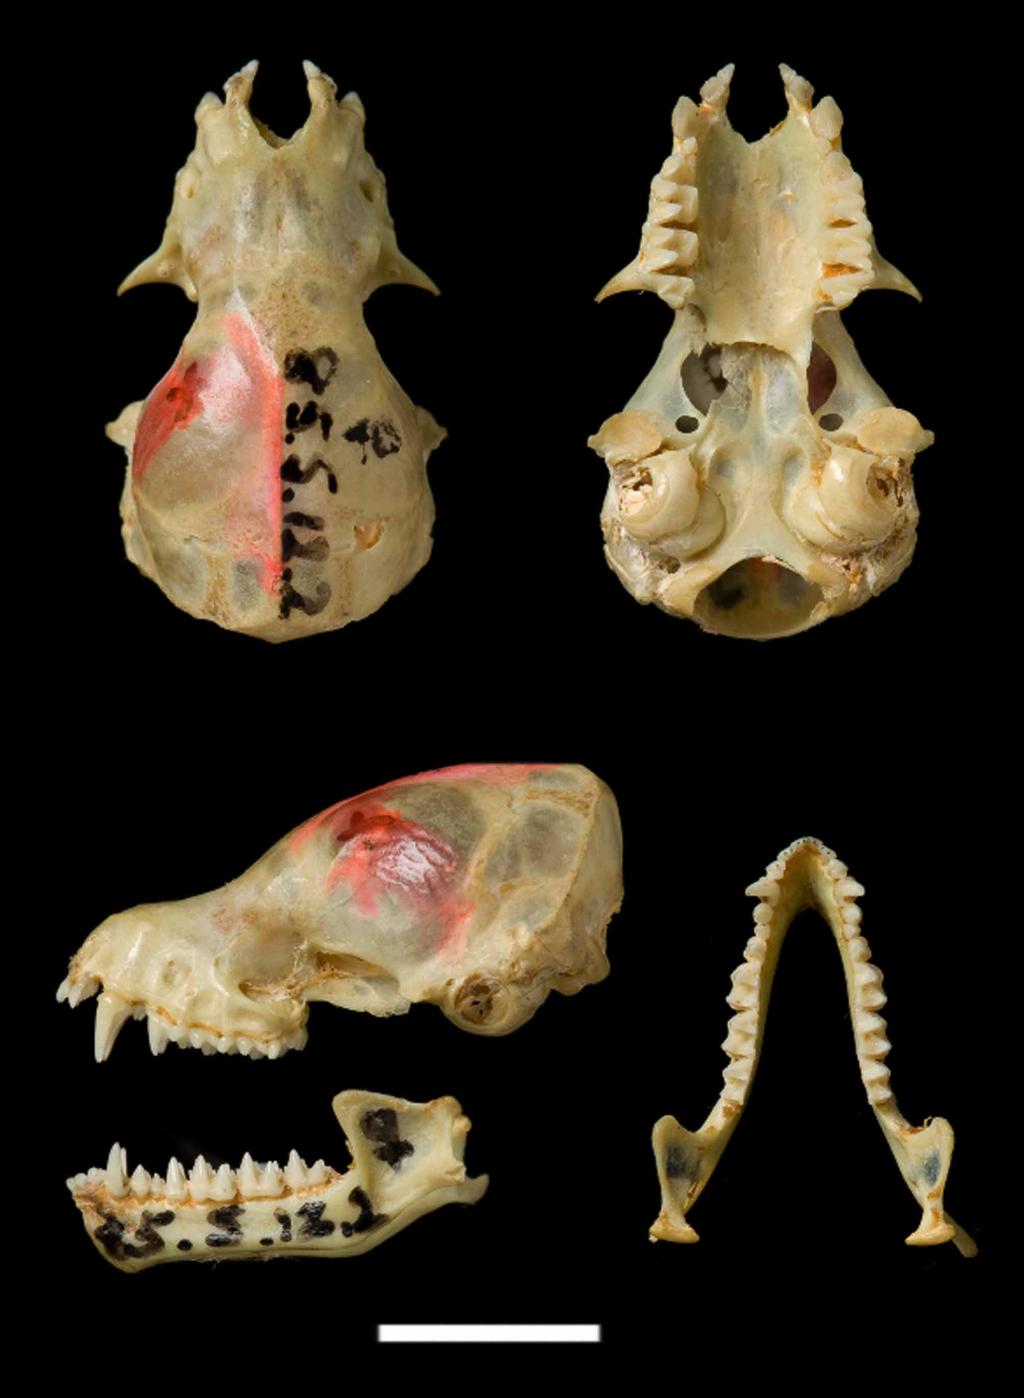 FIGURE 7. Dorsal, lateral and ventral views of the skull and mandible of the holotype of M. simus (BMNH 85.5.12.2). Scale bar = 5 mm.